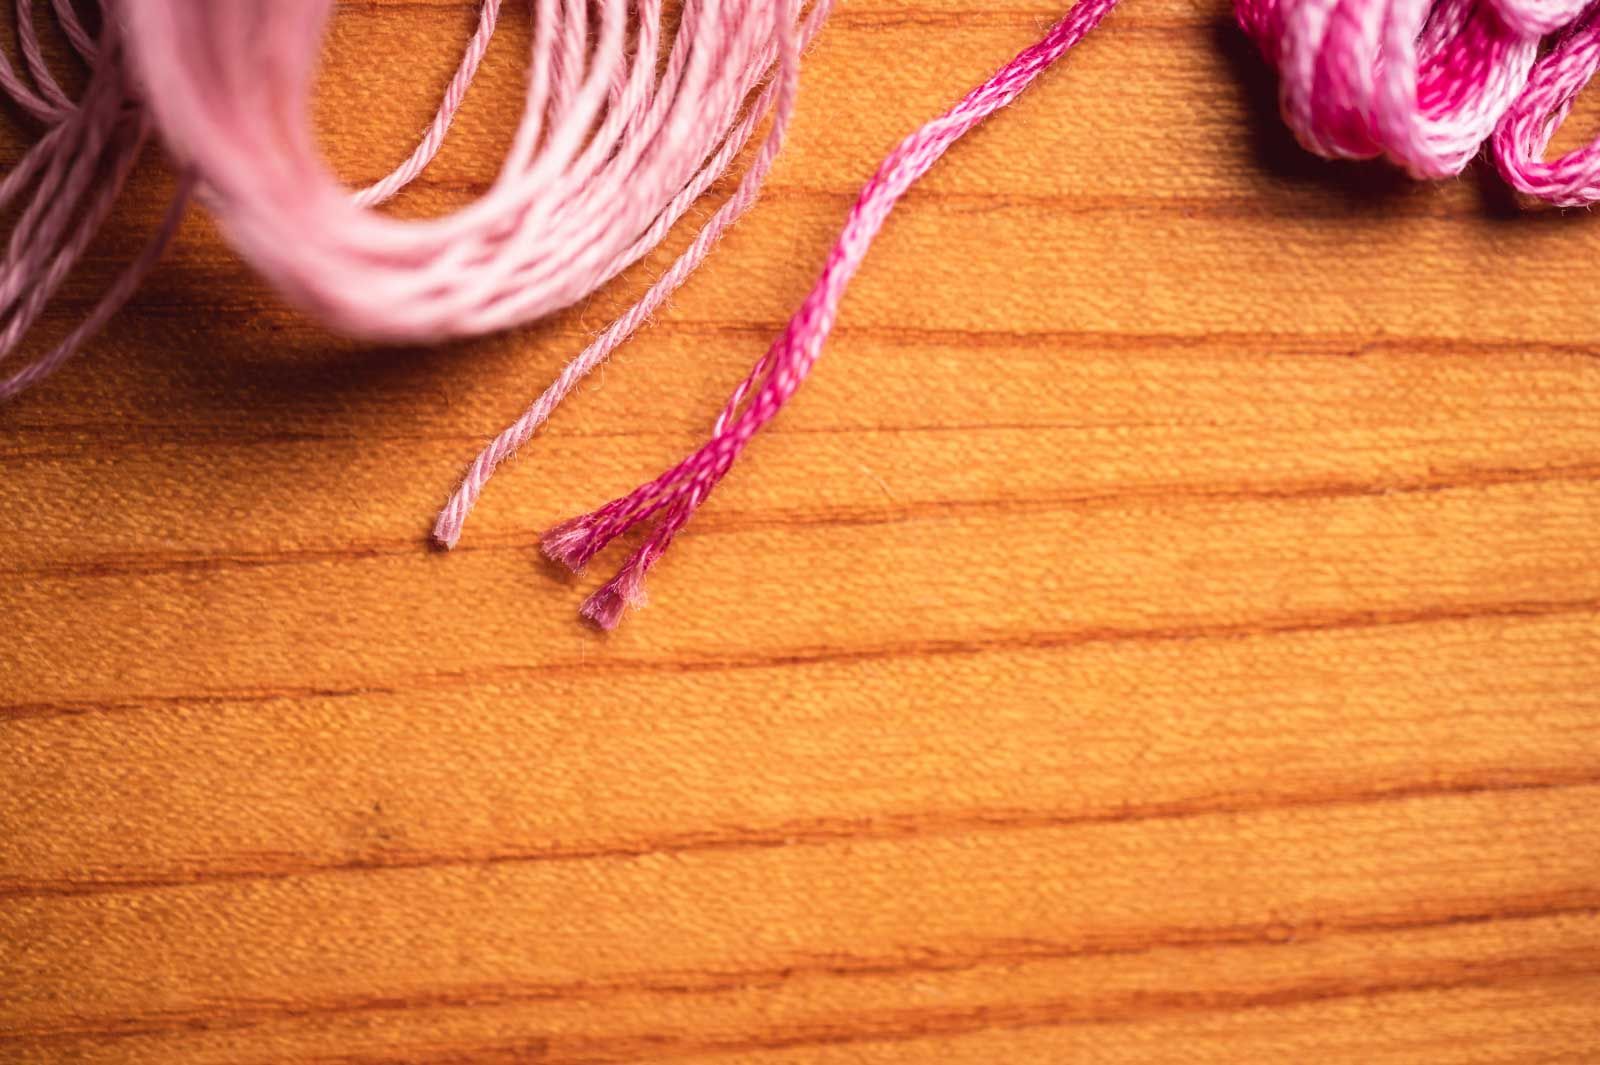 Pink sashiko thread on the left, pink embroidery thread on the right, cut ends looking different